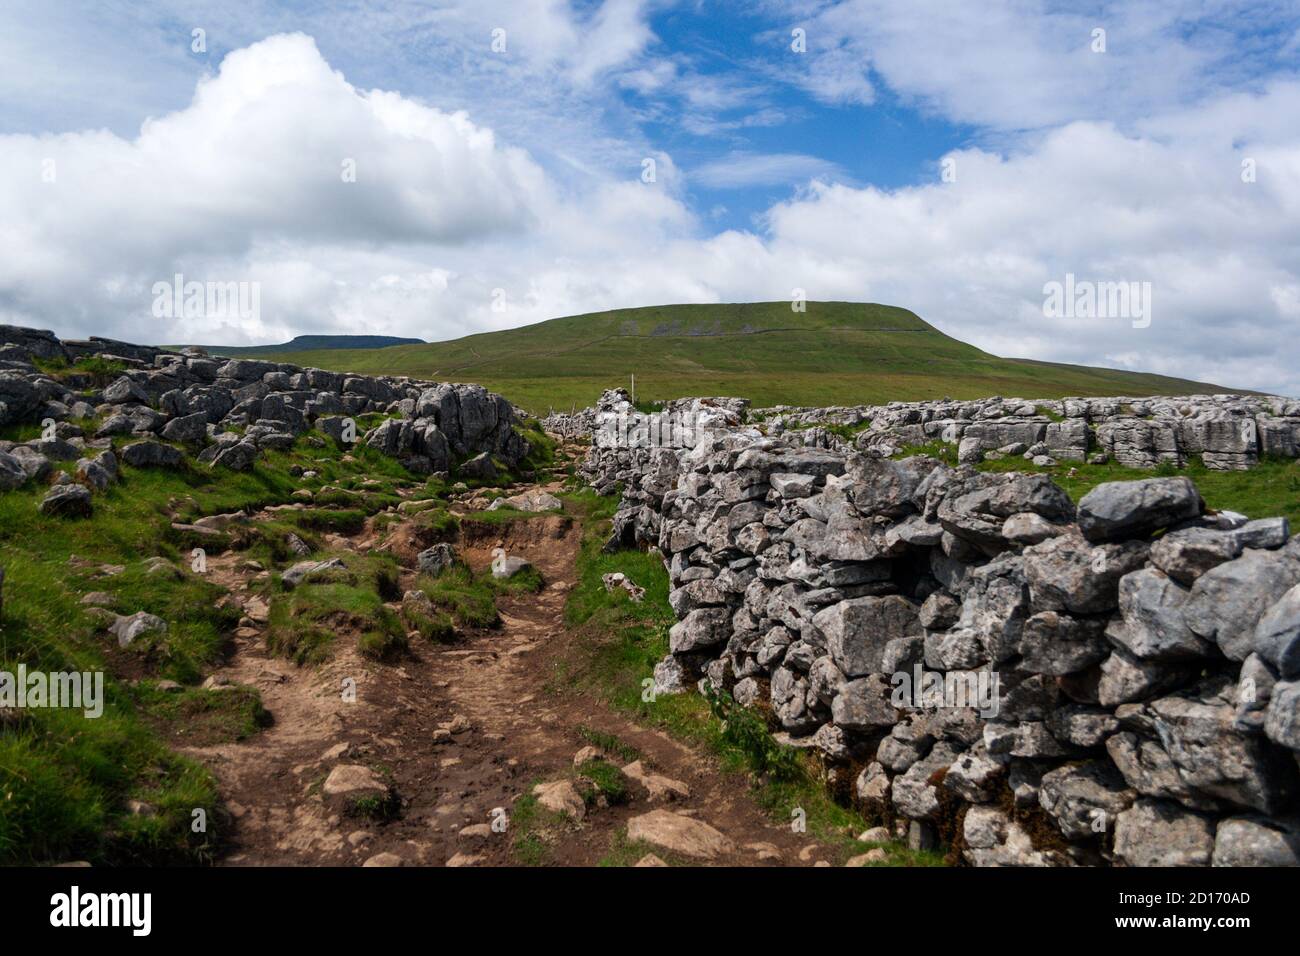 Sulber Nick. Yorkshire Dales. Stock Photo